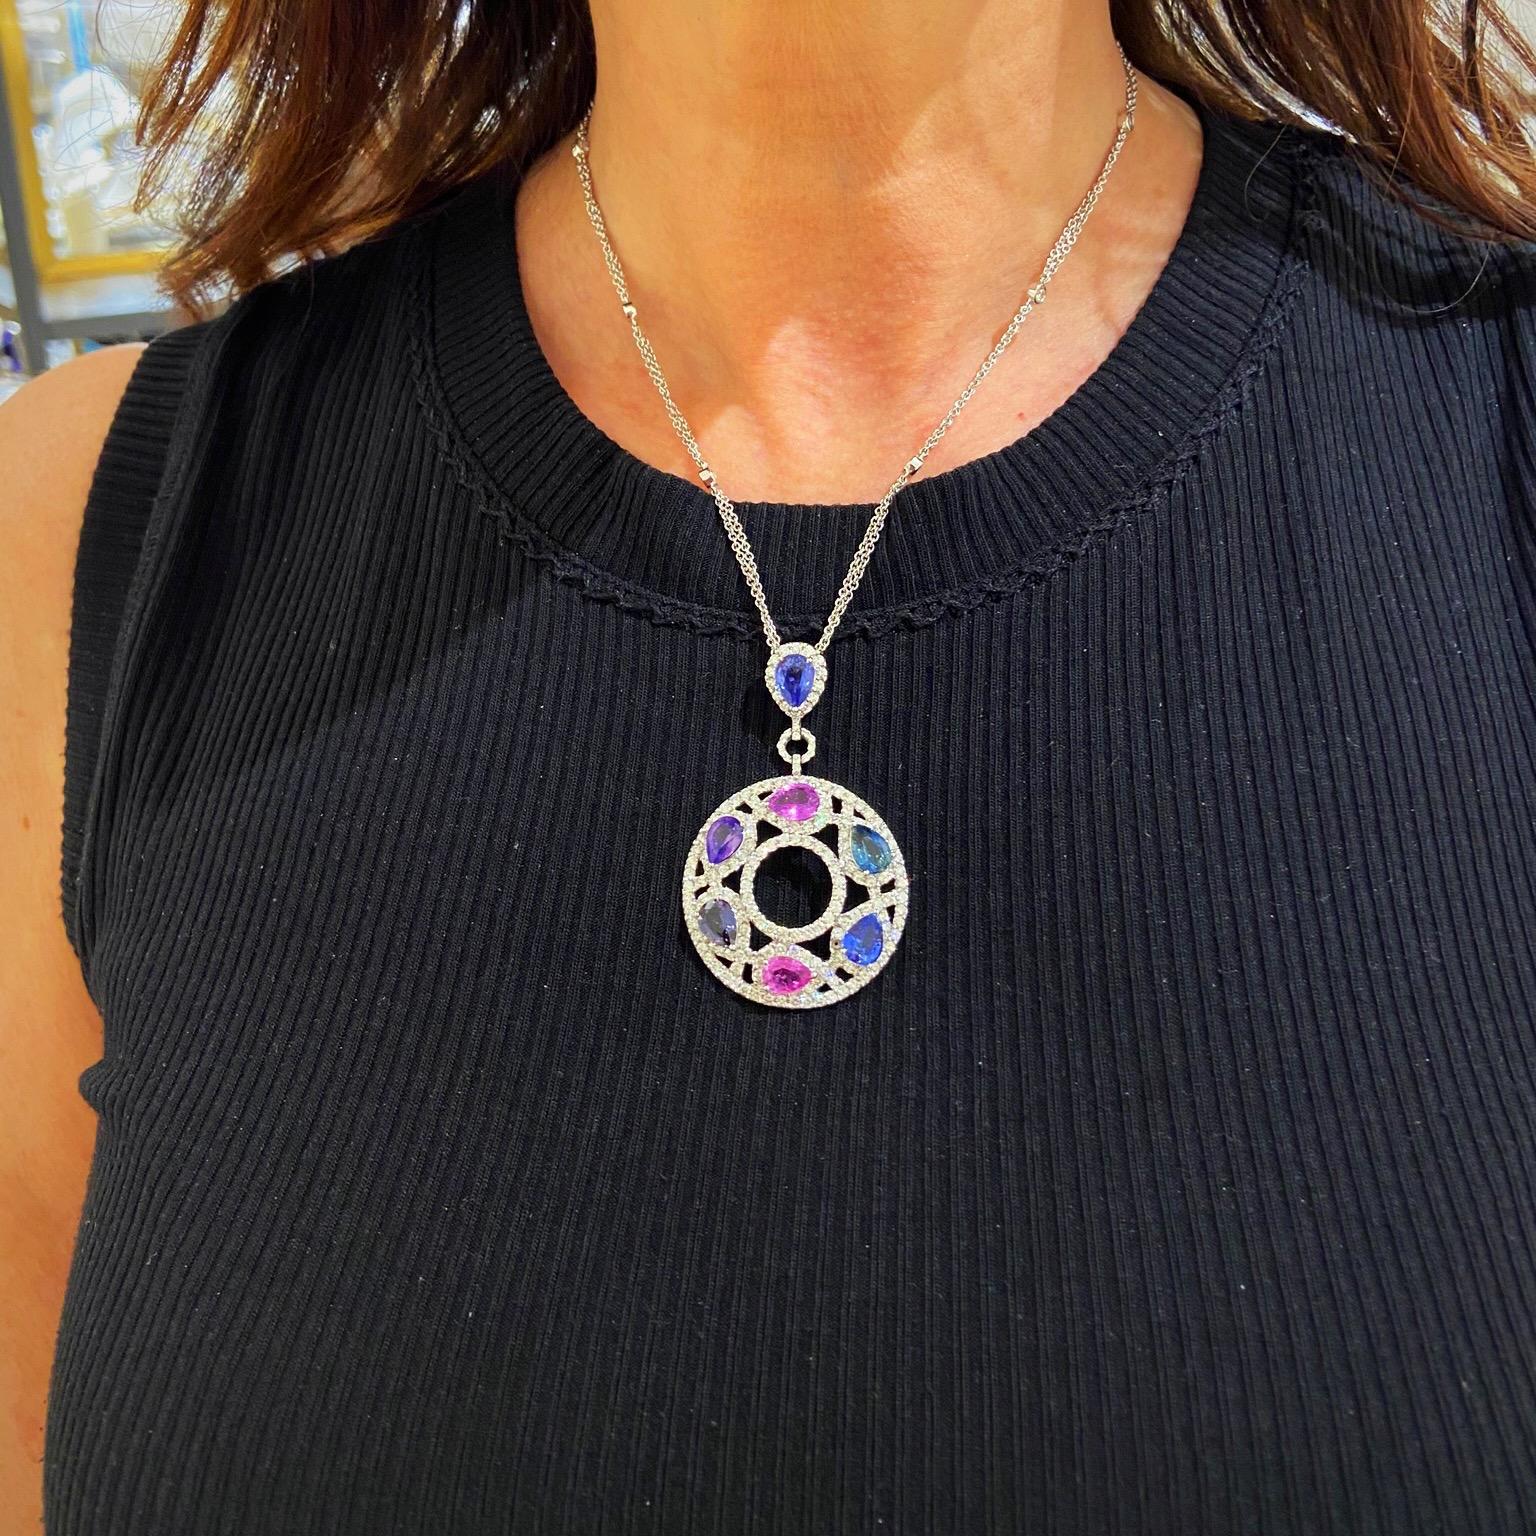 A magnificent 18 karat white gold and Diamond pendant. The pendant is set with round brilliant Diamonds in an openwork setting. Seven pear shaped Sapphires in shades of Purple, Pink and Blue are the centerpiece of this pendant. The pendant and bale